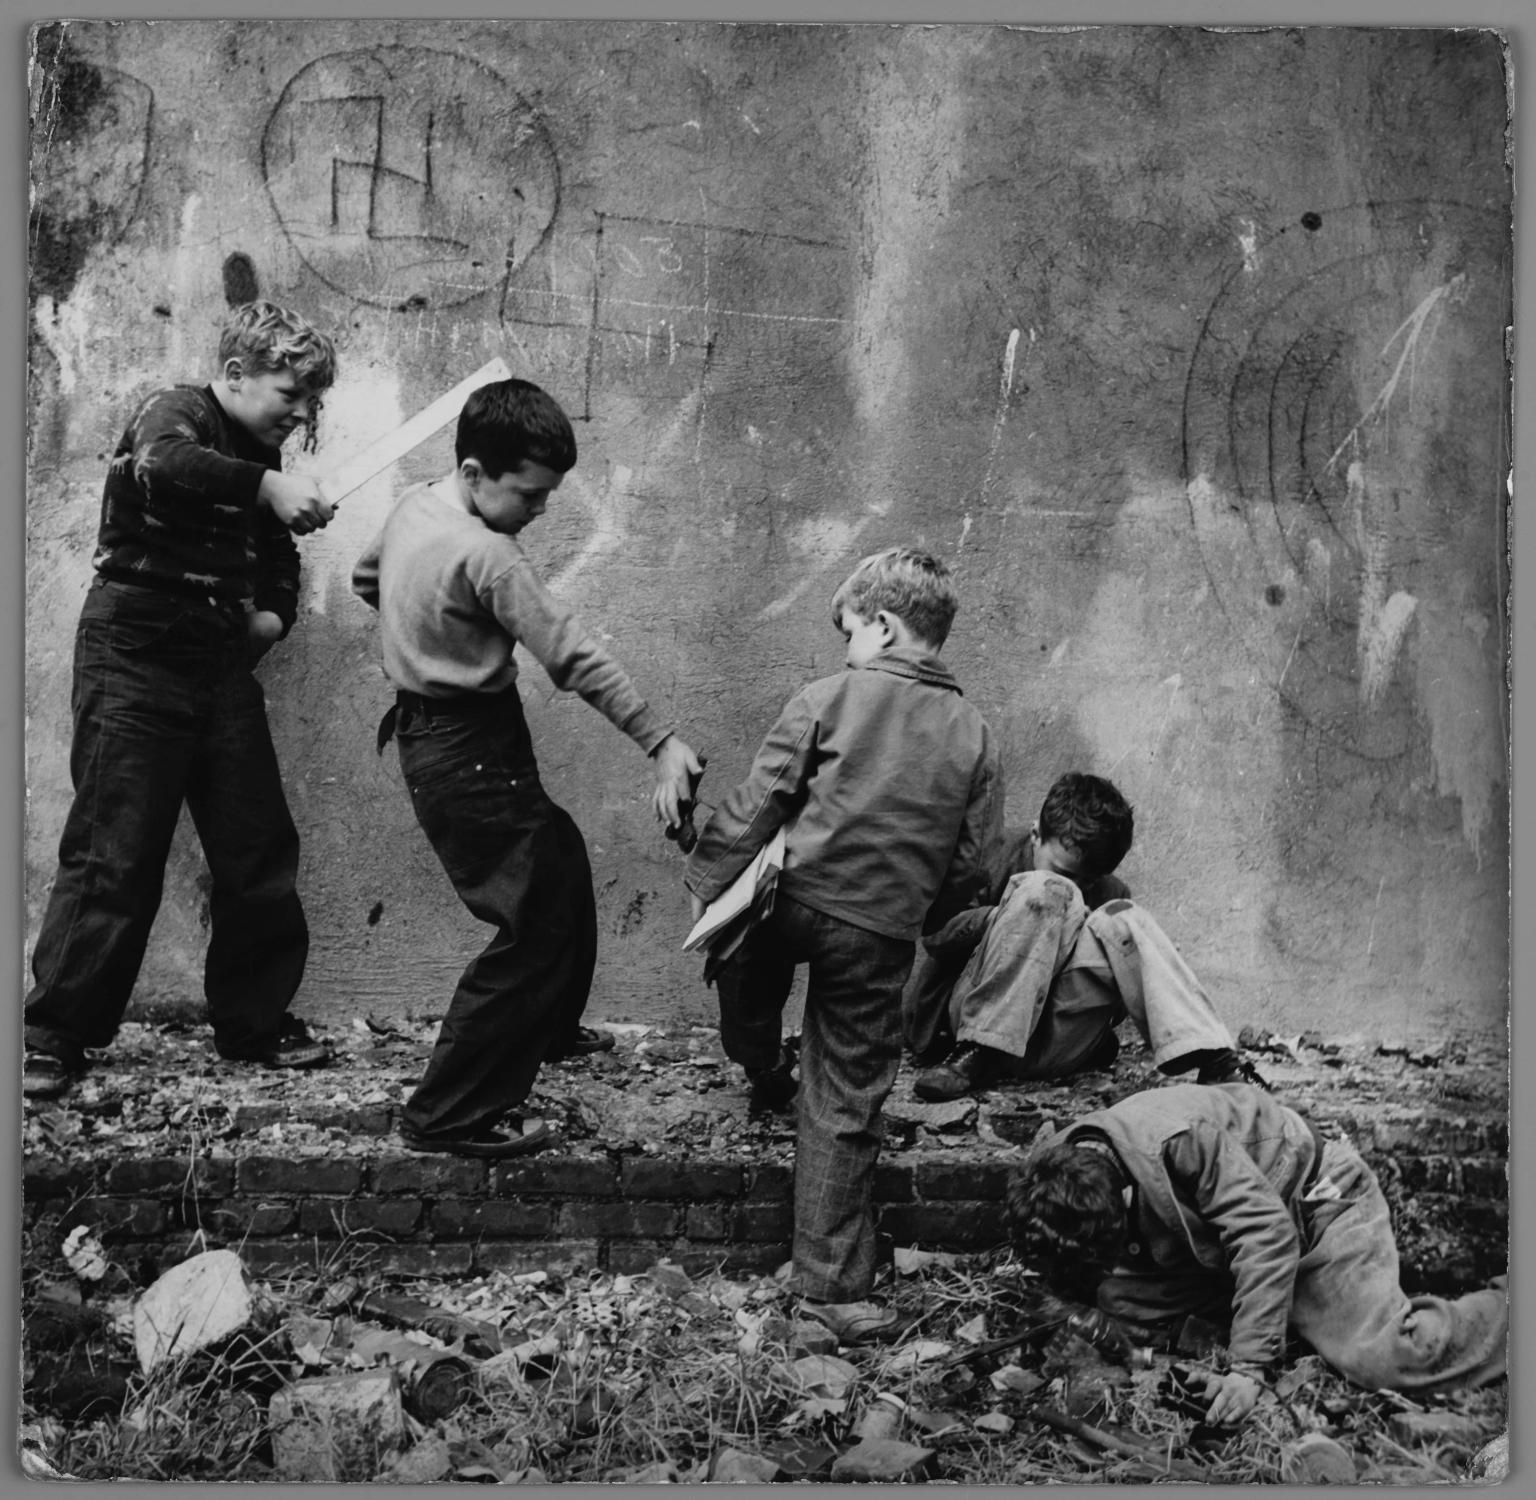 Photograph of five young boys standing and sitting in various poses on crumbling foundation of a wall with swastika drawn on it. One boy points a flat wooden stick at another boy, who is giving a metal object to a seated boy. 